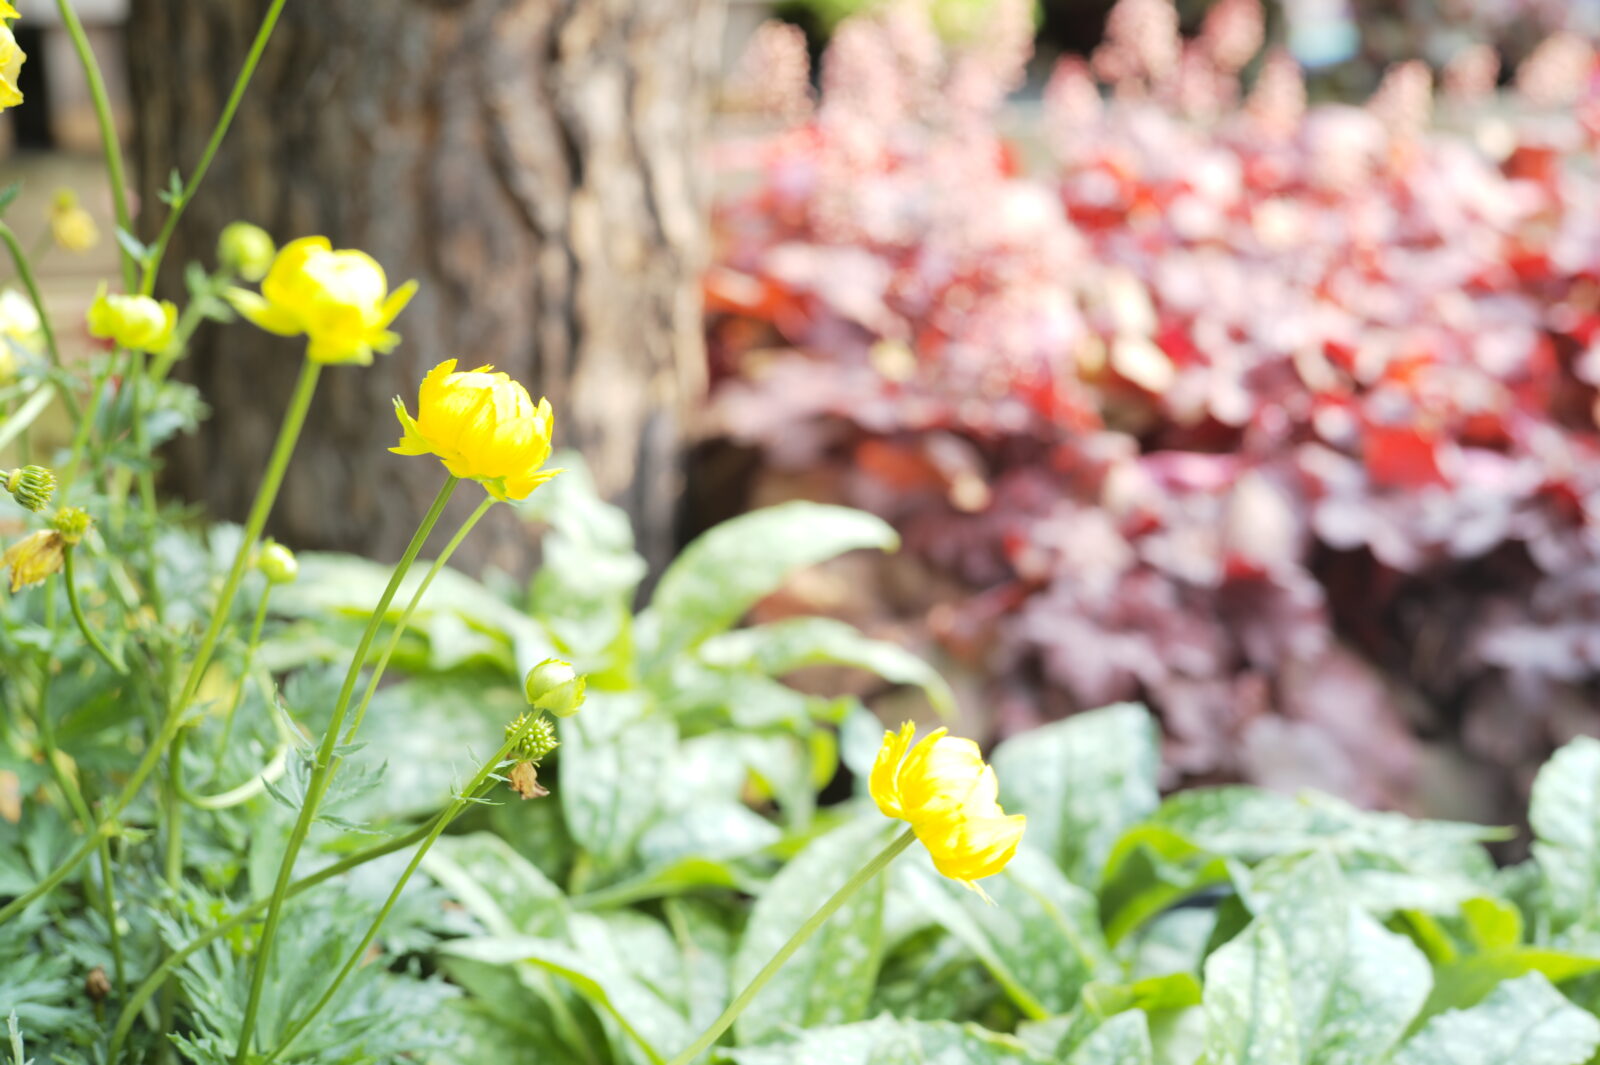 Small, yellow flowers in the foreground with other plants and trees in the background. 